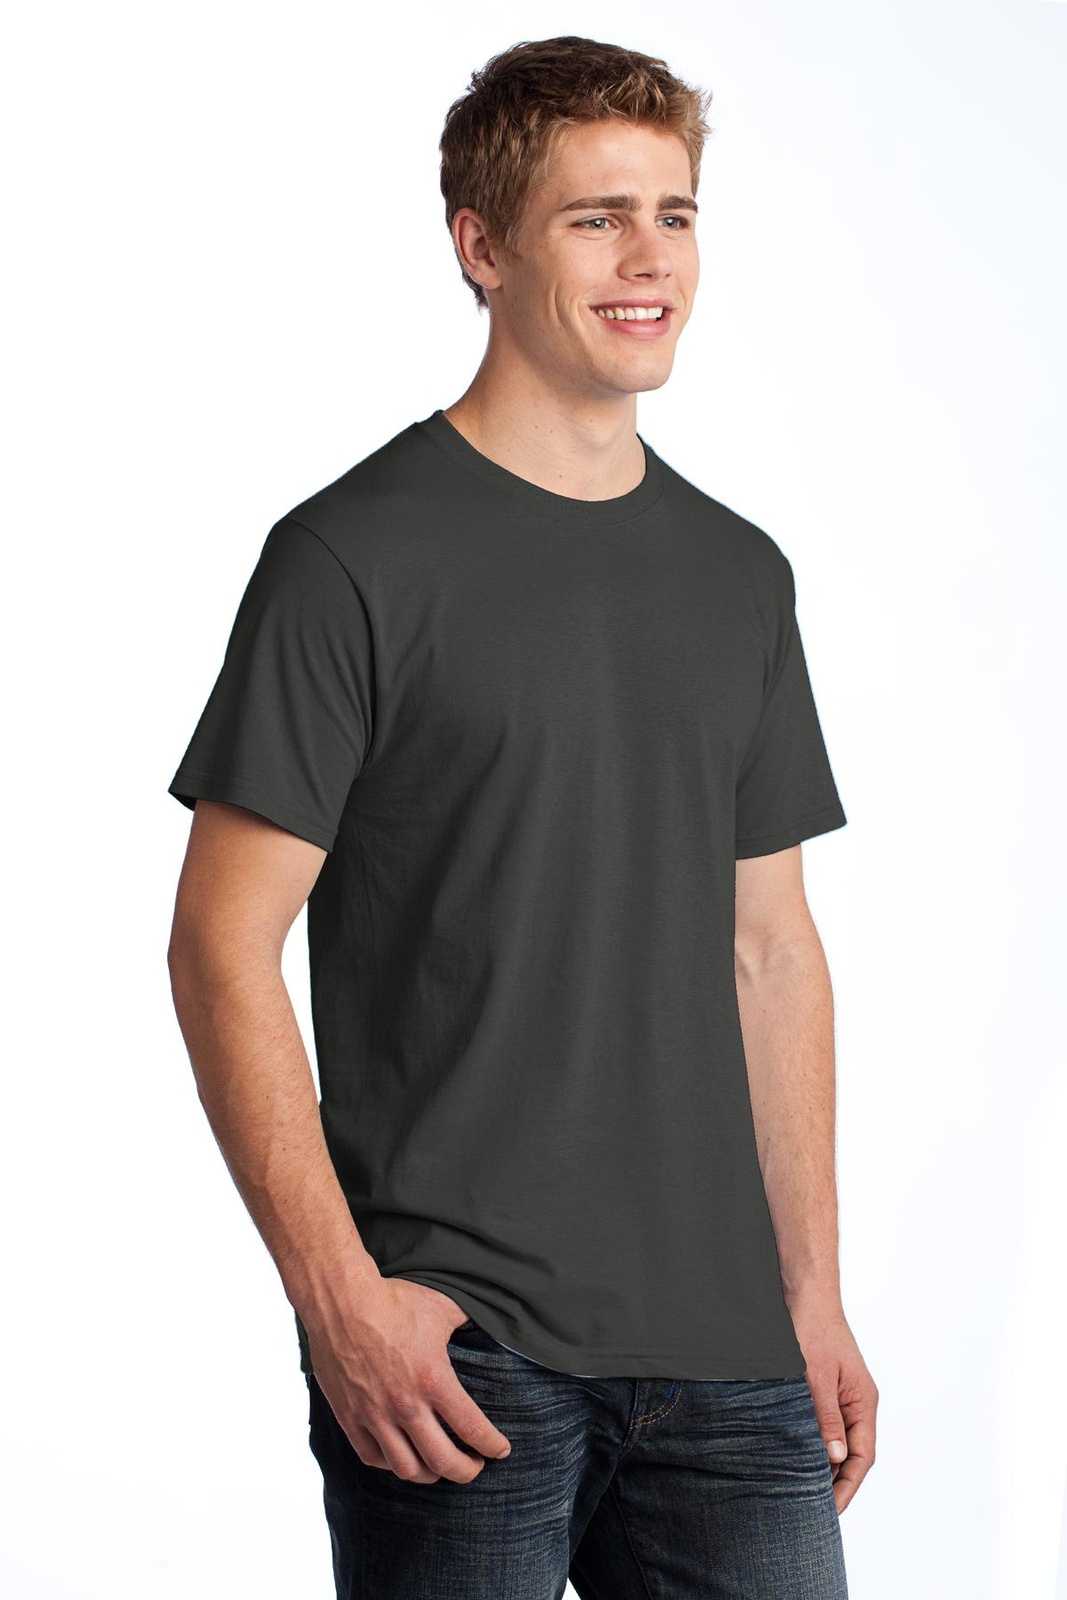 Fruit of the Loom 3930 HD Cotton 100% Cotton T-Shirt - Charcoal Gray - HIT a Double